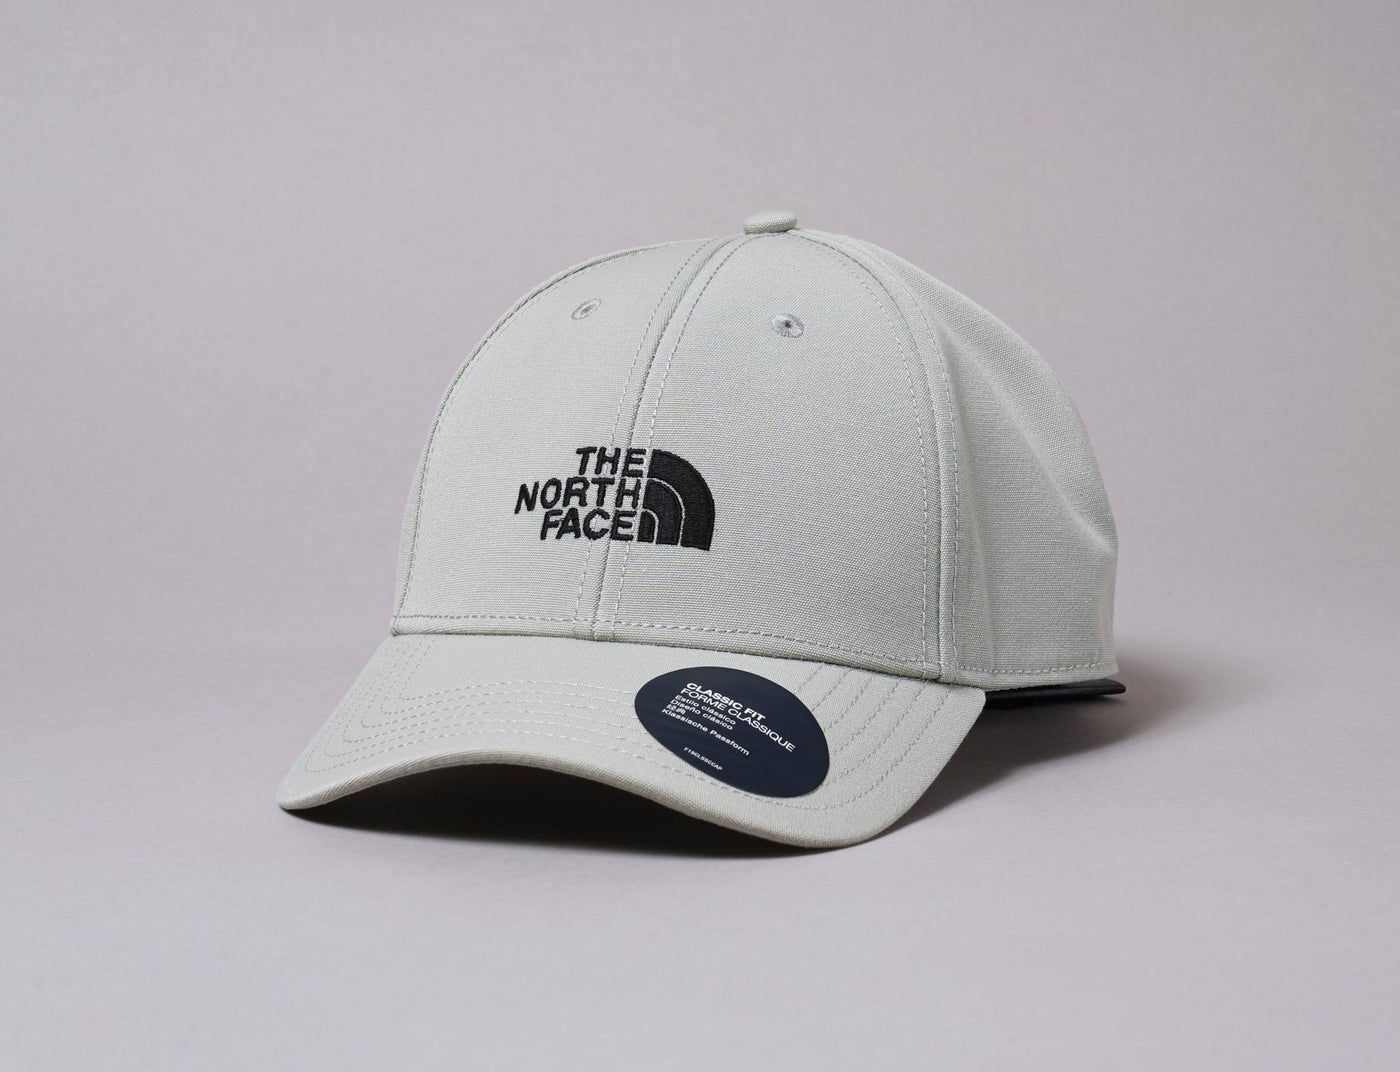 Cap Adjustable The North Face Cap Grey Recycled 66 Classic Hat Wrought Iron The North Face Adjustable Cap / Grey / One Size